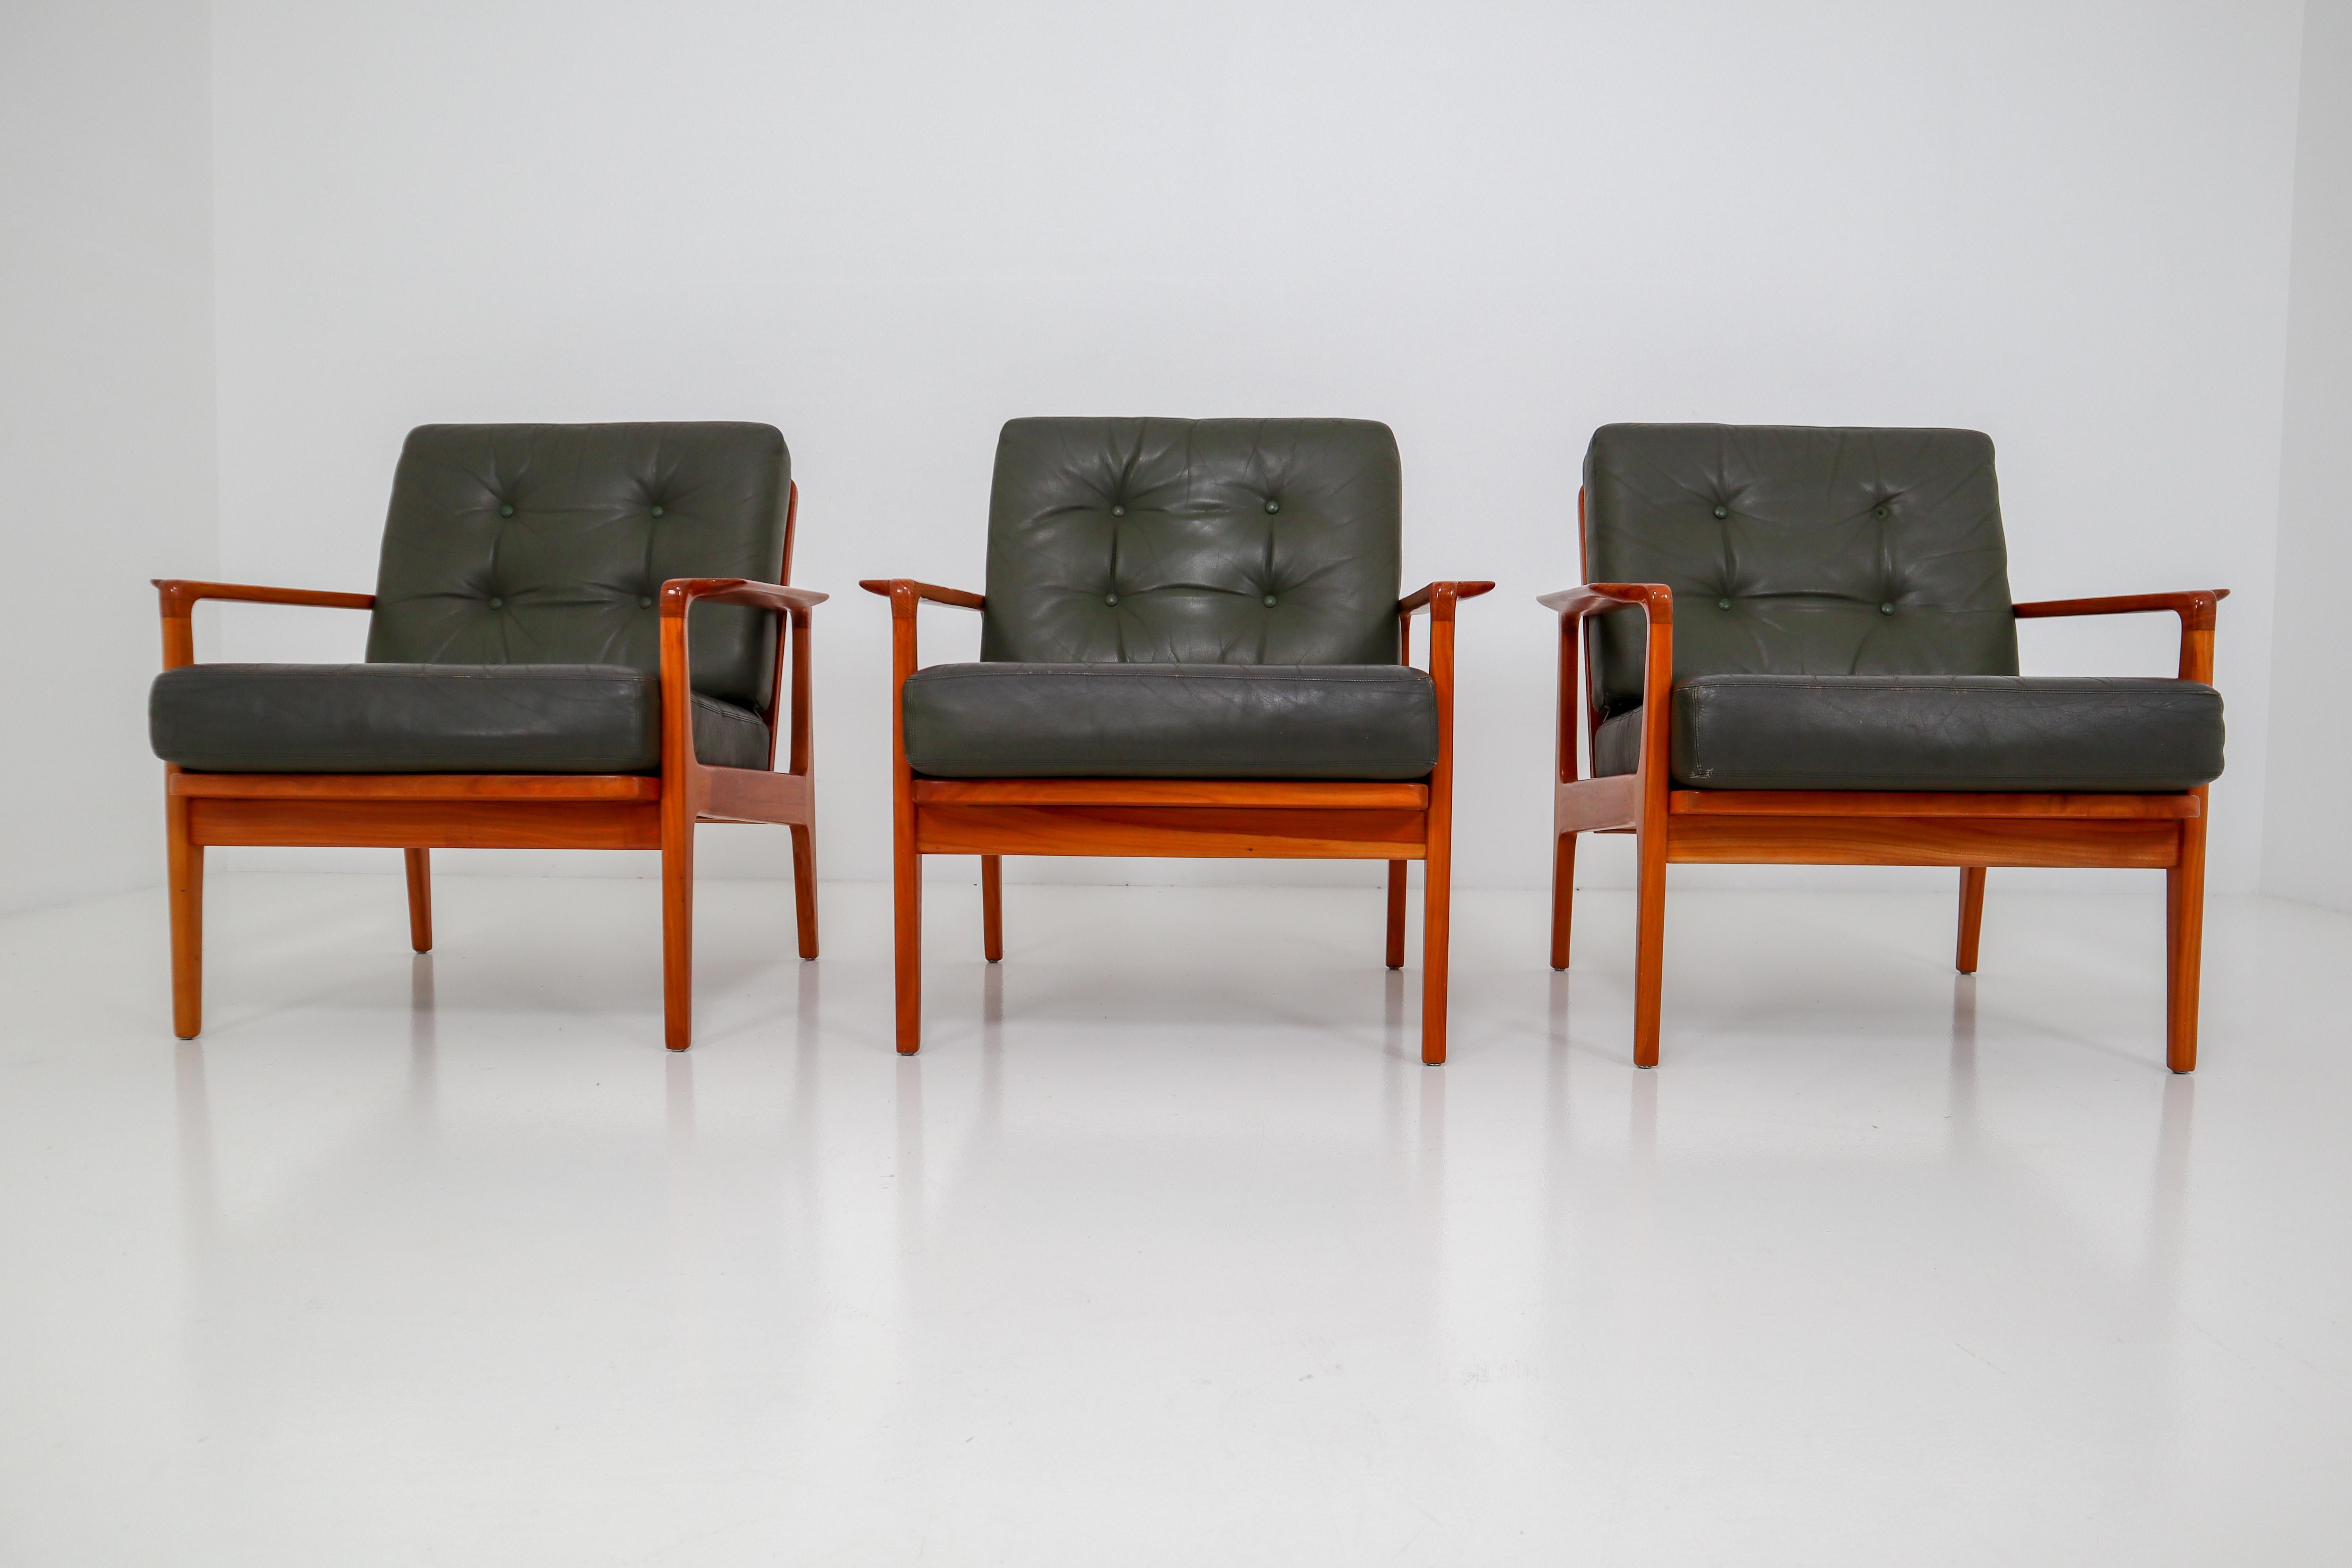 Scandinavian armchairs in fine leather, circa 1960. These beautiful armchairs have a fine wood grain and original leather upholstery with minor signs of usage and patina. A very decorative and comfortable armchair of high quality.